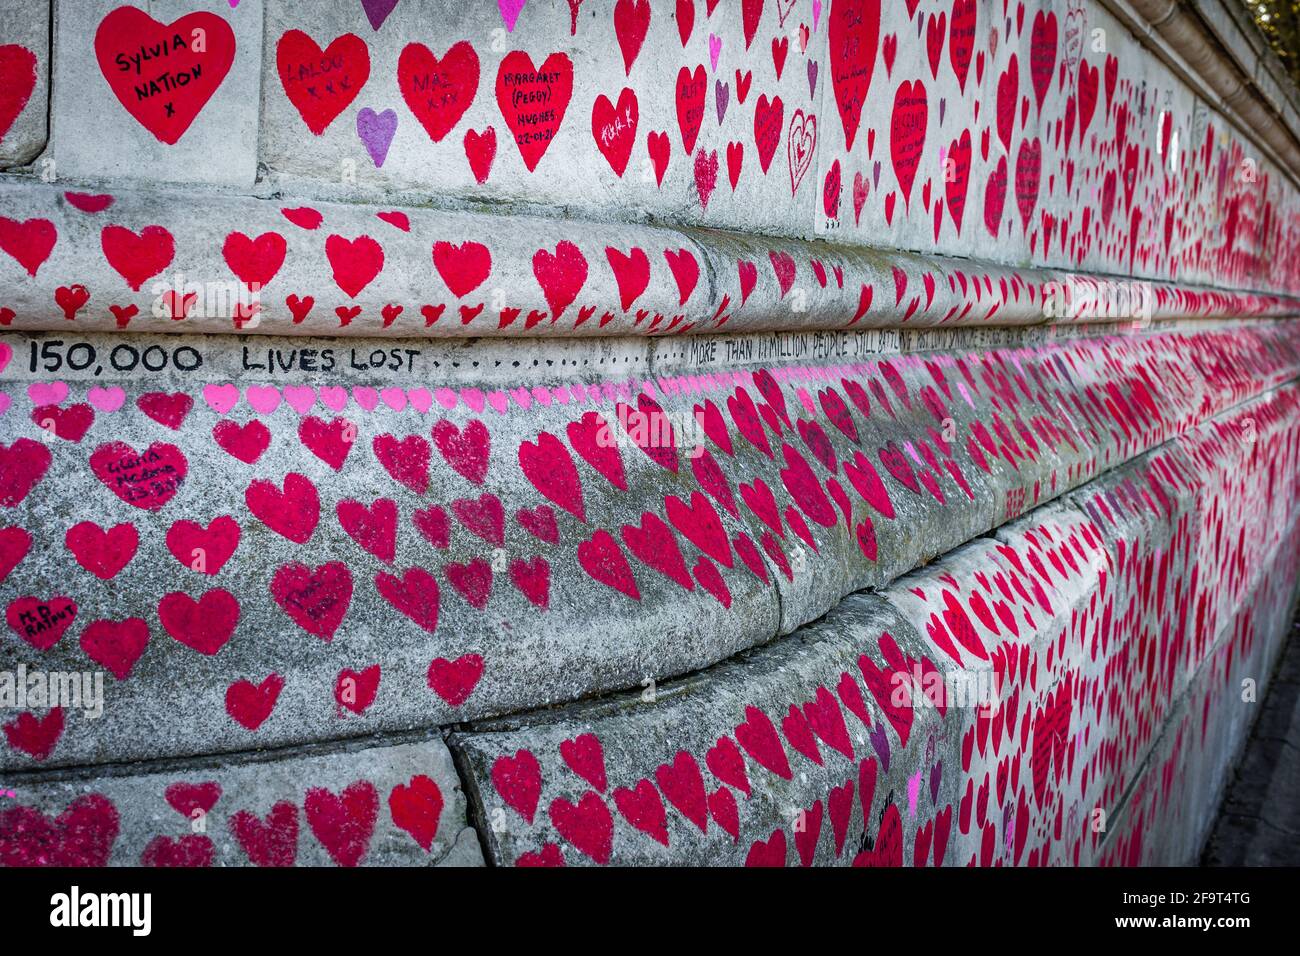 Ein Teil der National Covid Memorial Wall am South Bank in London. Stockfoto